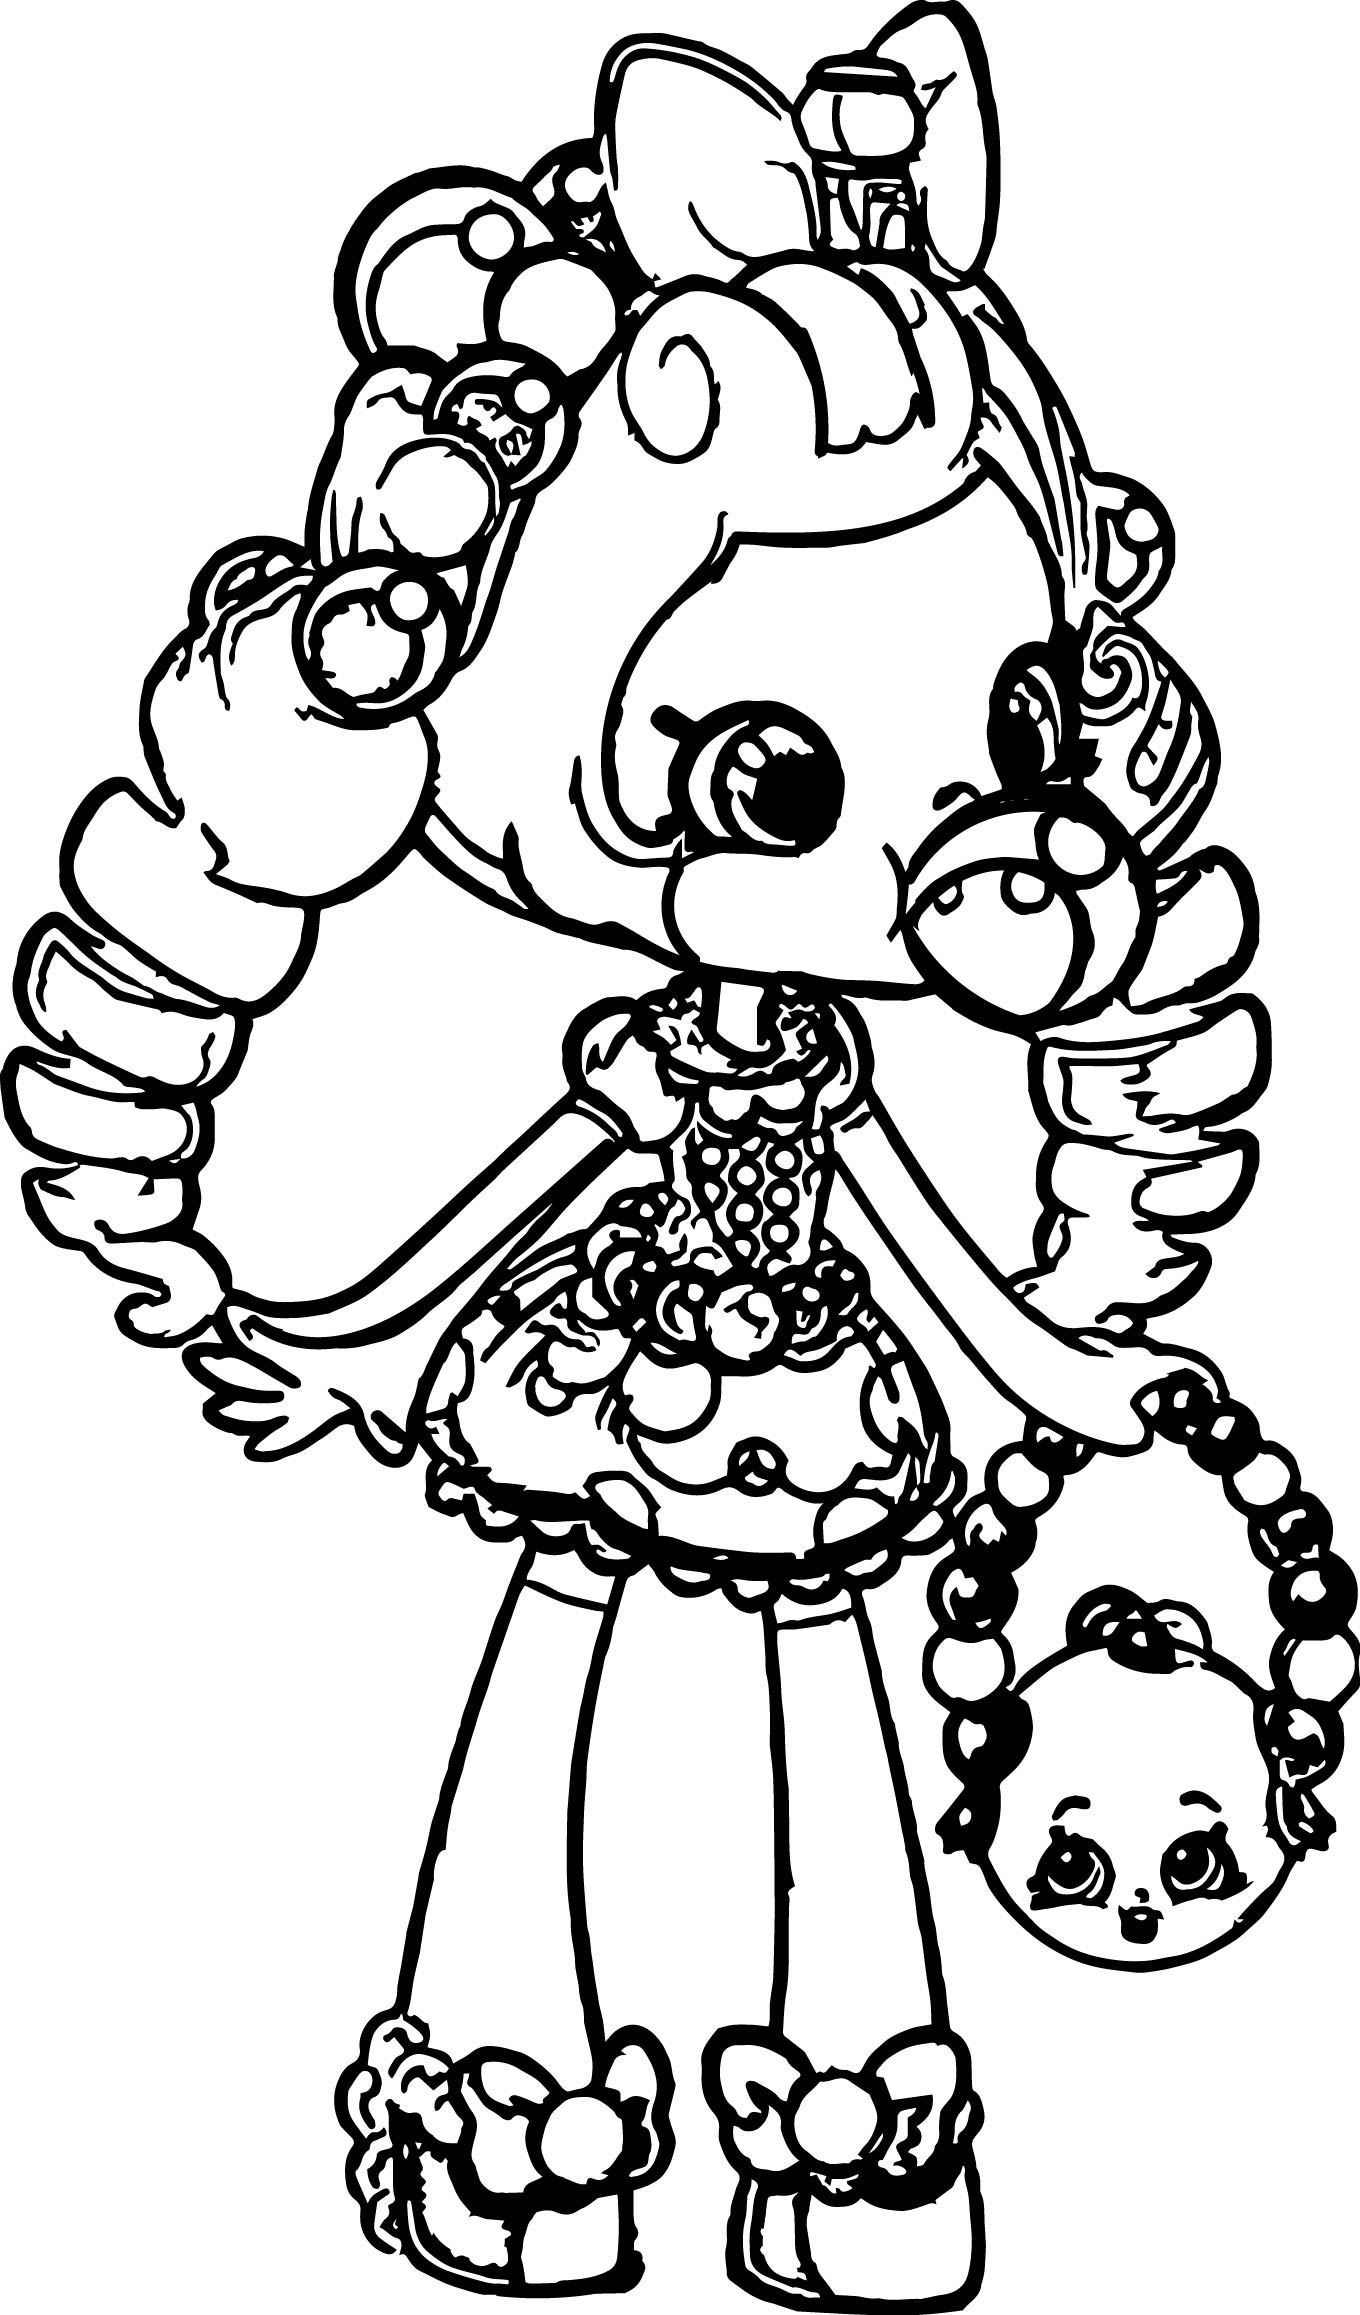 Shopkins Coloring Pages For Girls at GetColorings.com ...